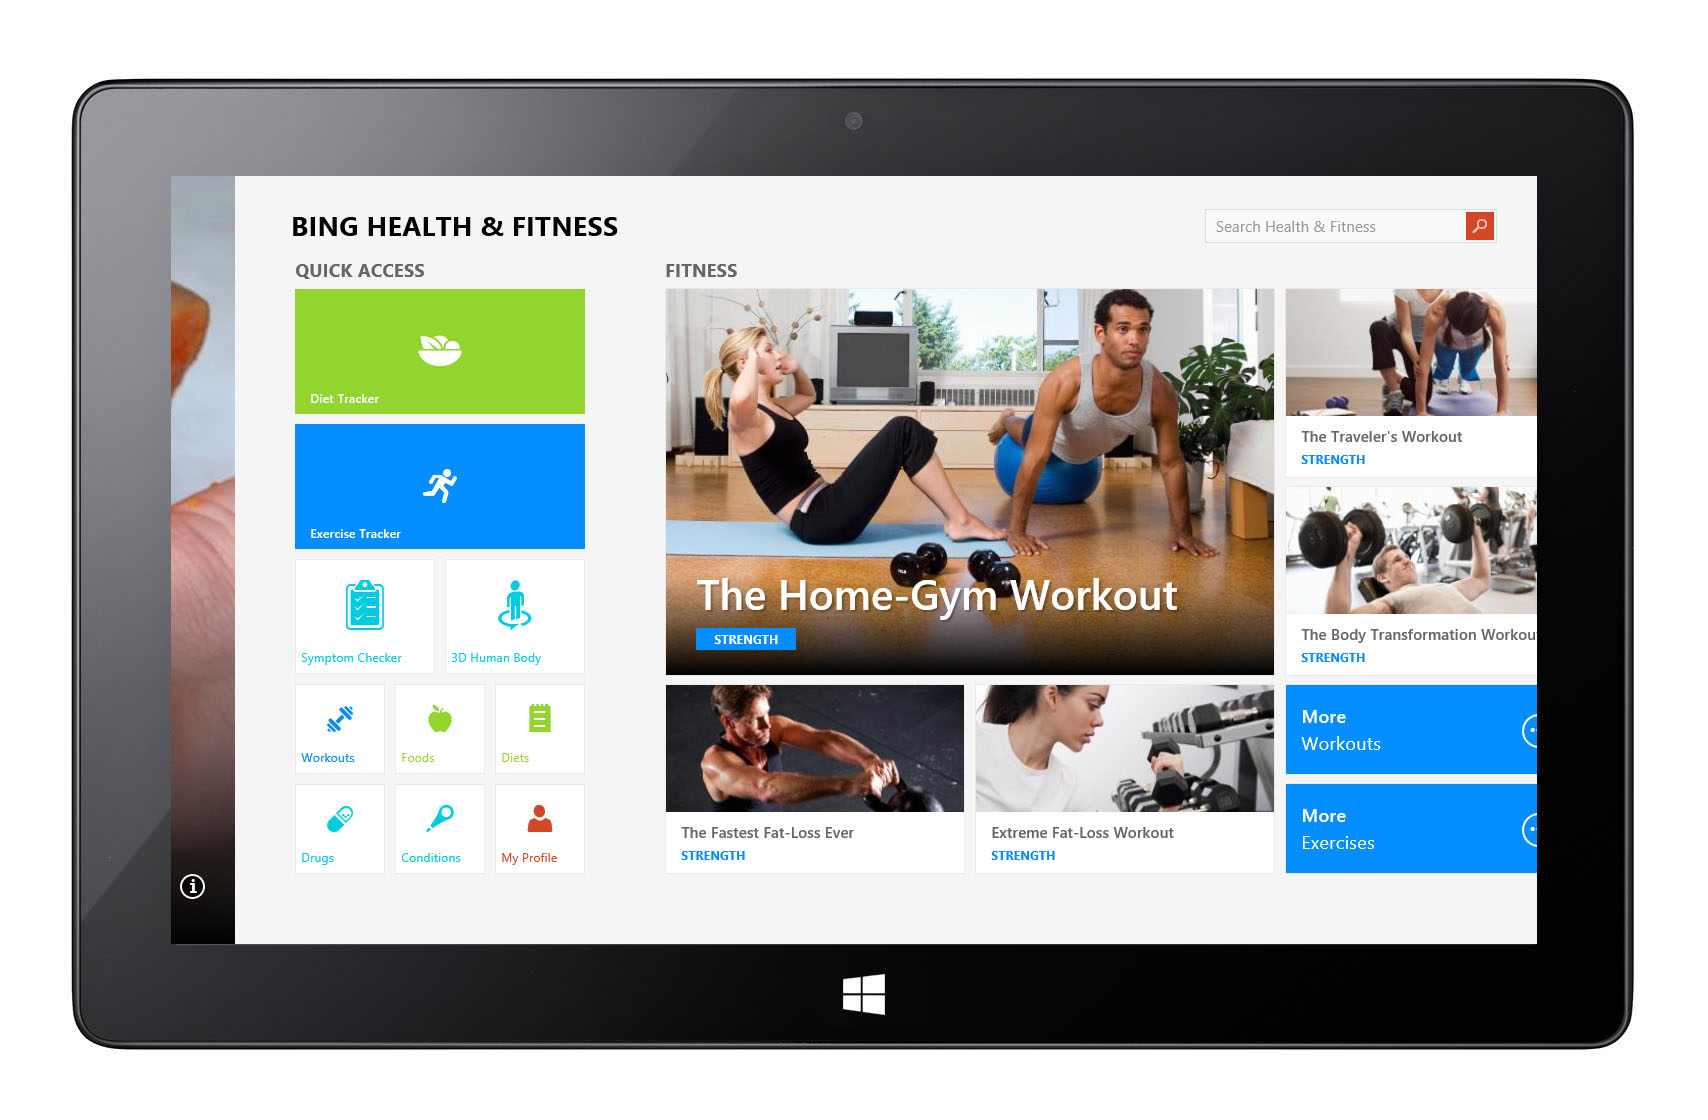 Health & Fitness for Windows 8